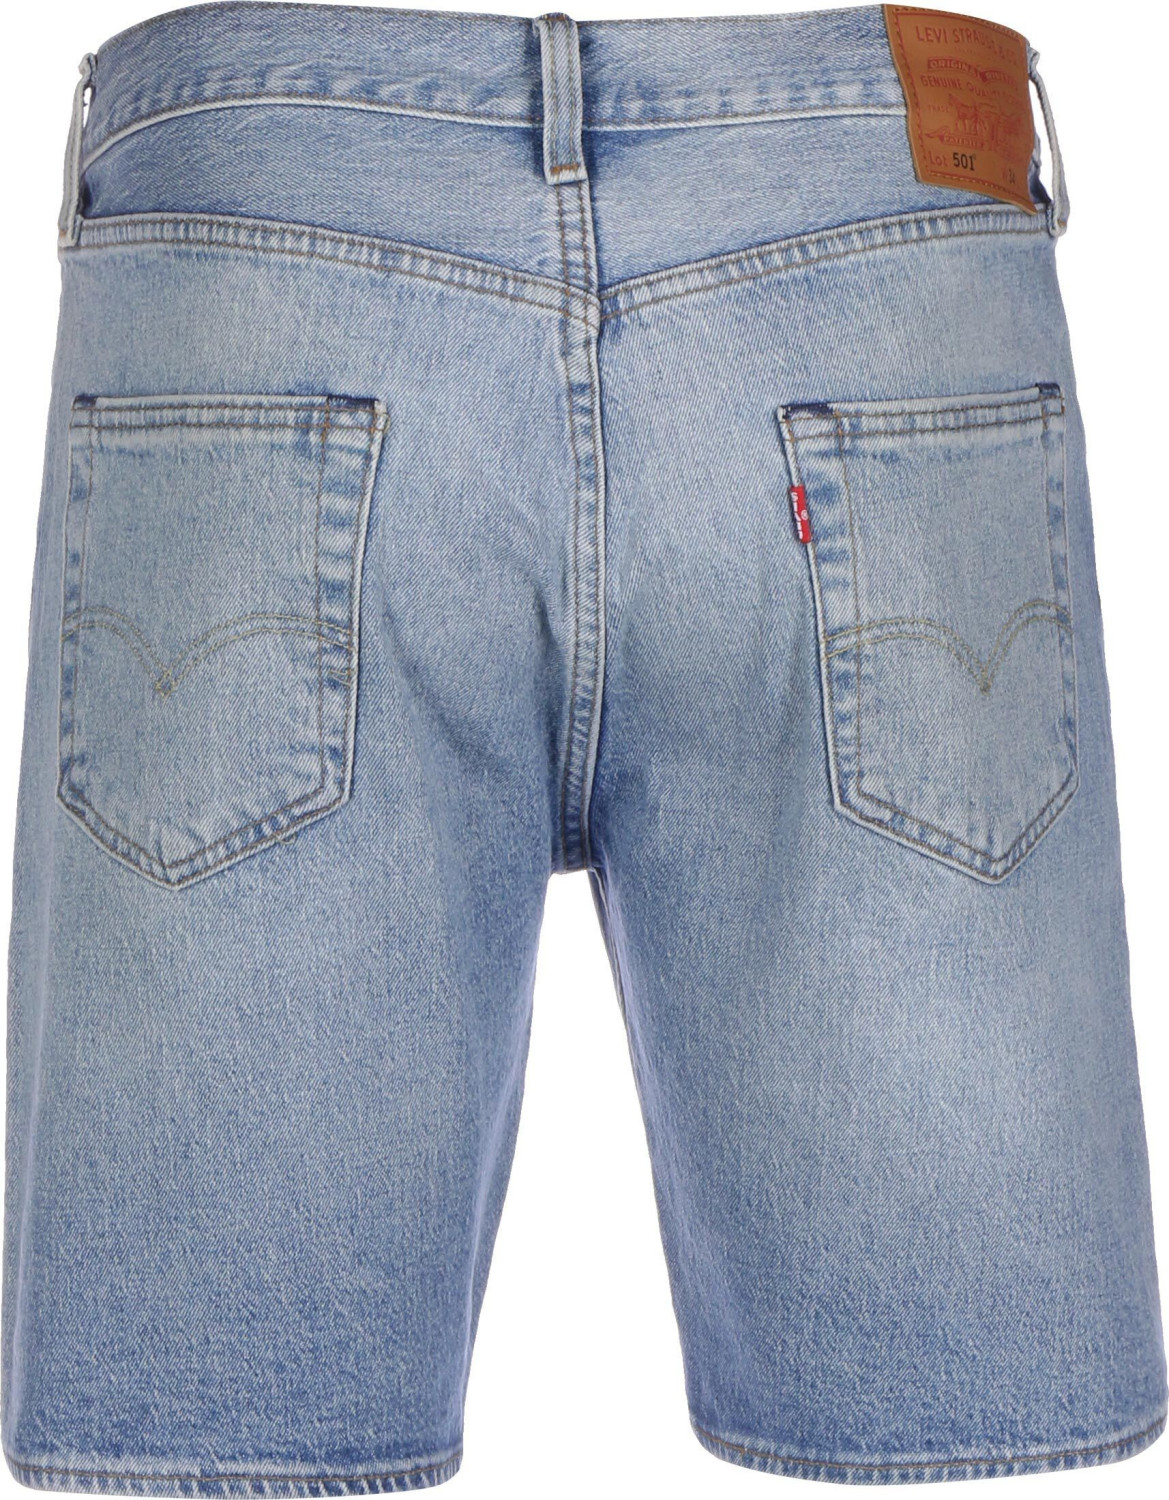 Buy Levi's 501 Original Fit Shorts (36512) island stream from £32.49 ...